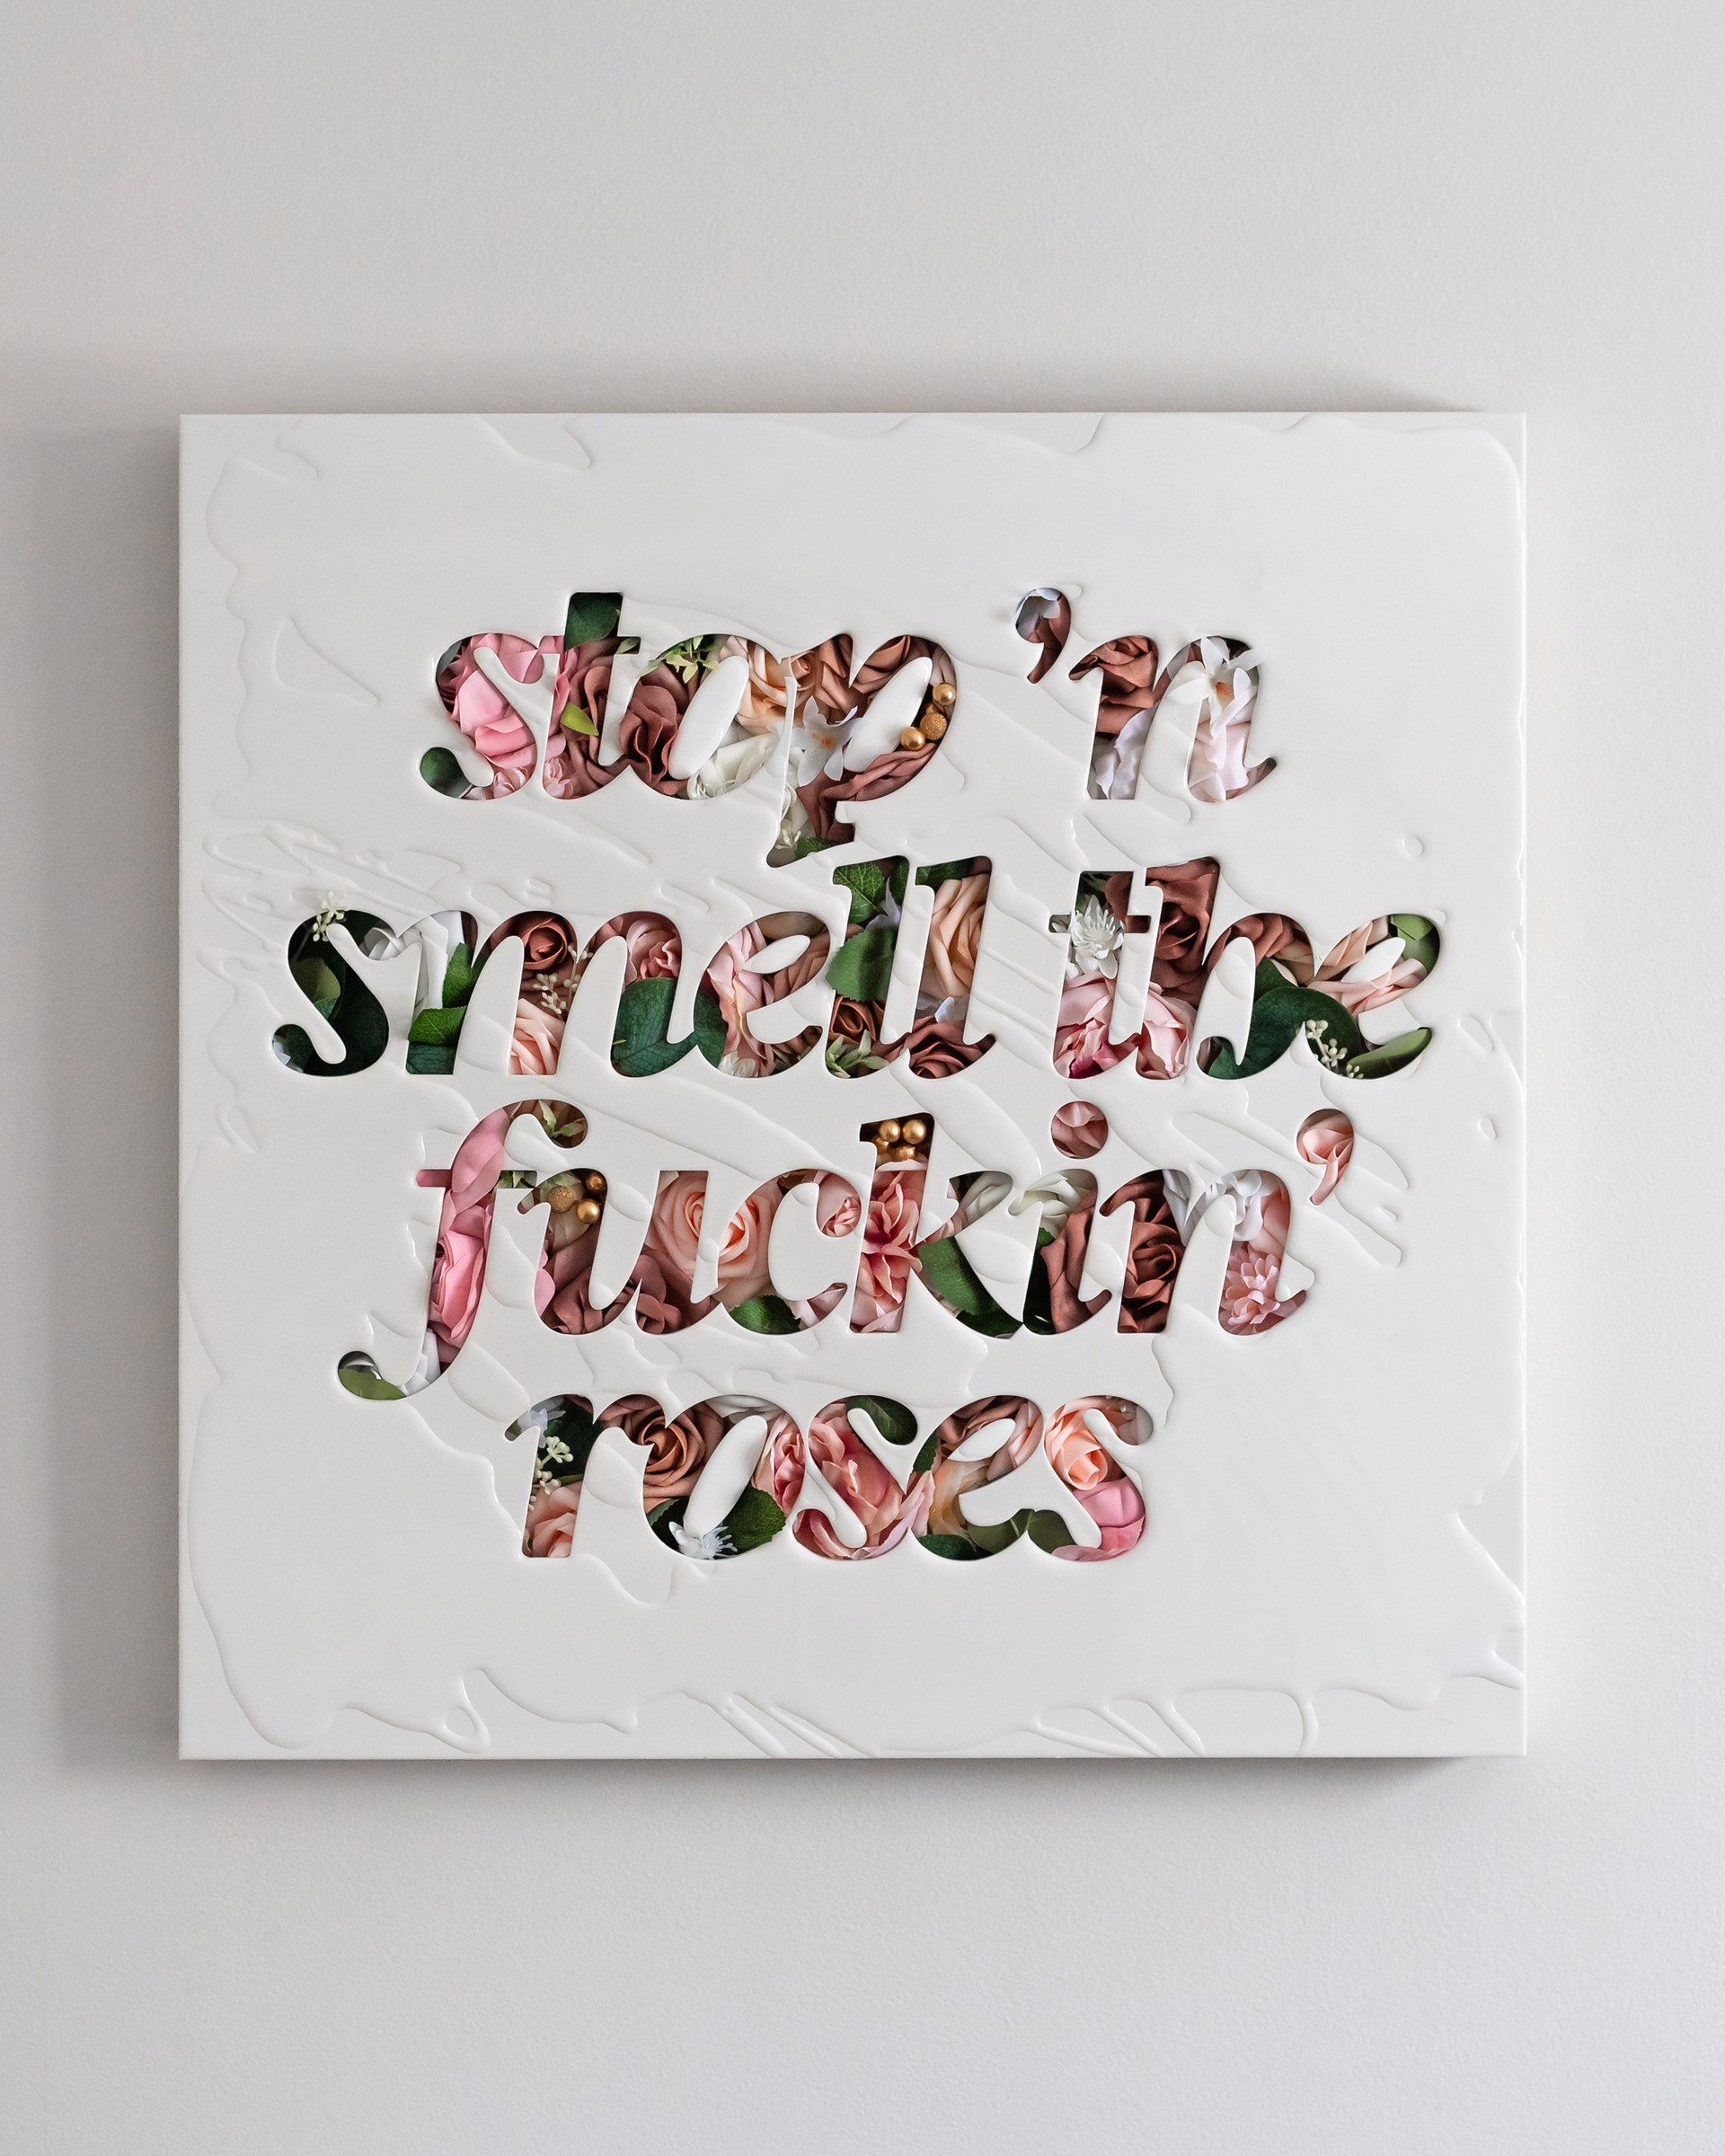 Stop 'n Smell the F***** roses by Ryan Labrosse